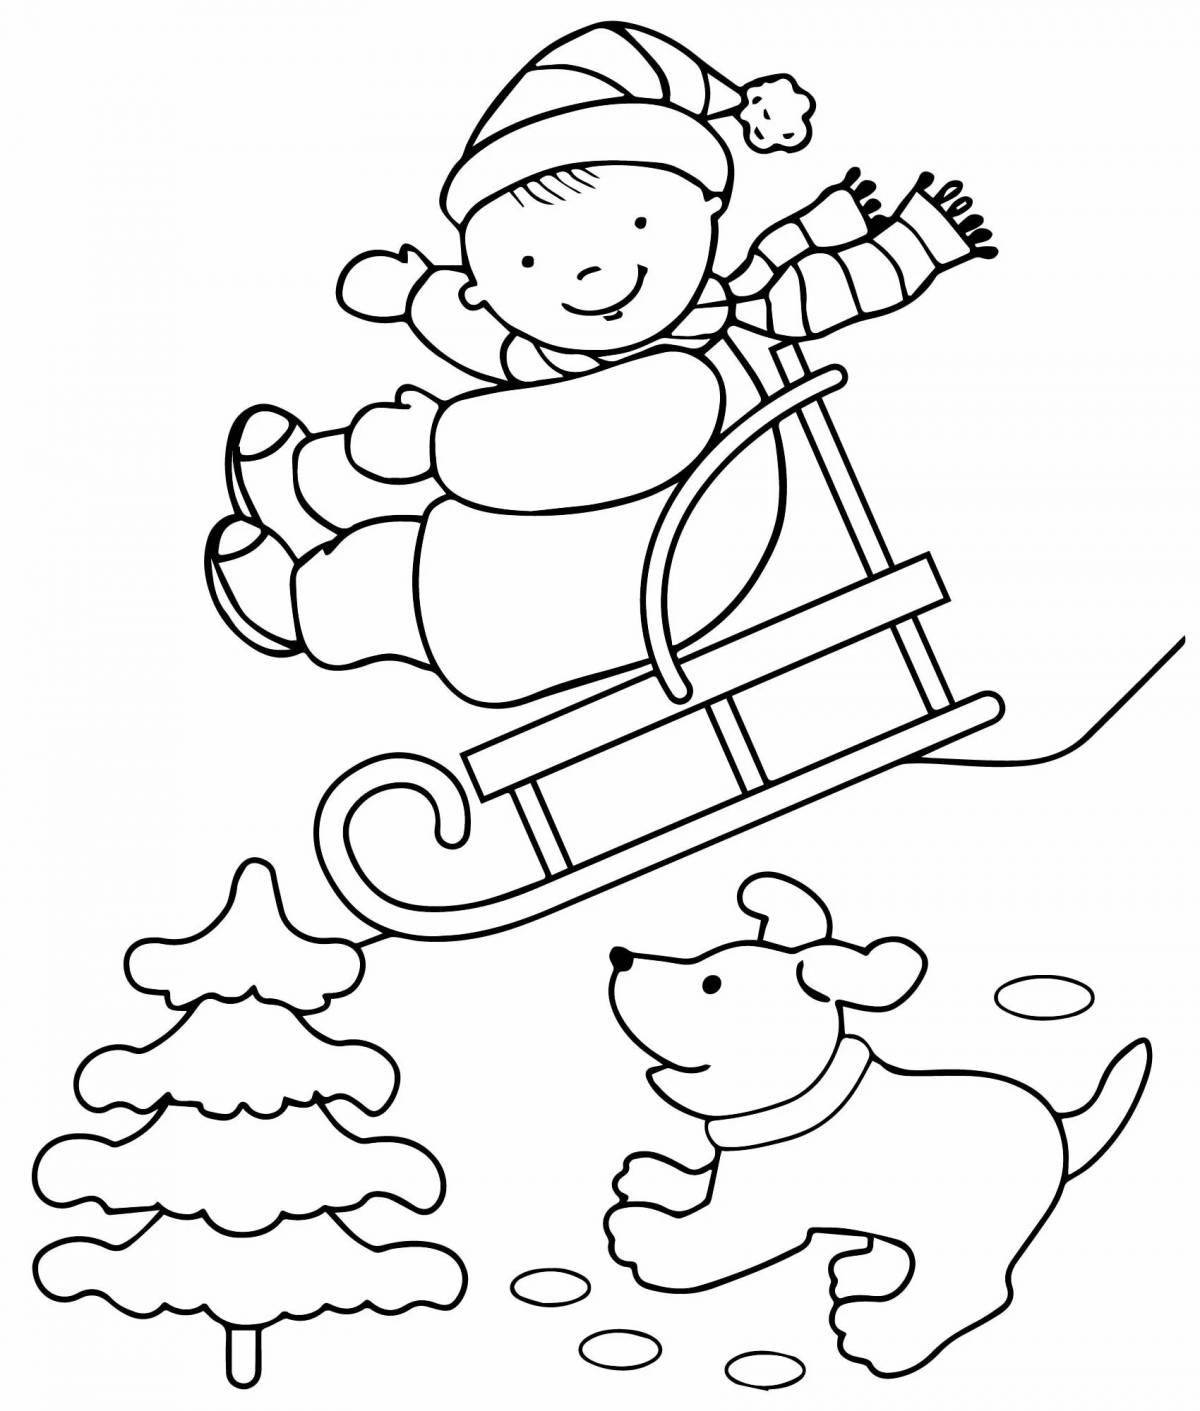 Cute sleigh coloring book for 4-5 year olds